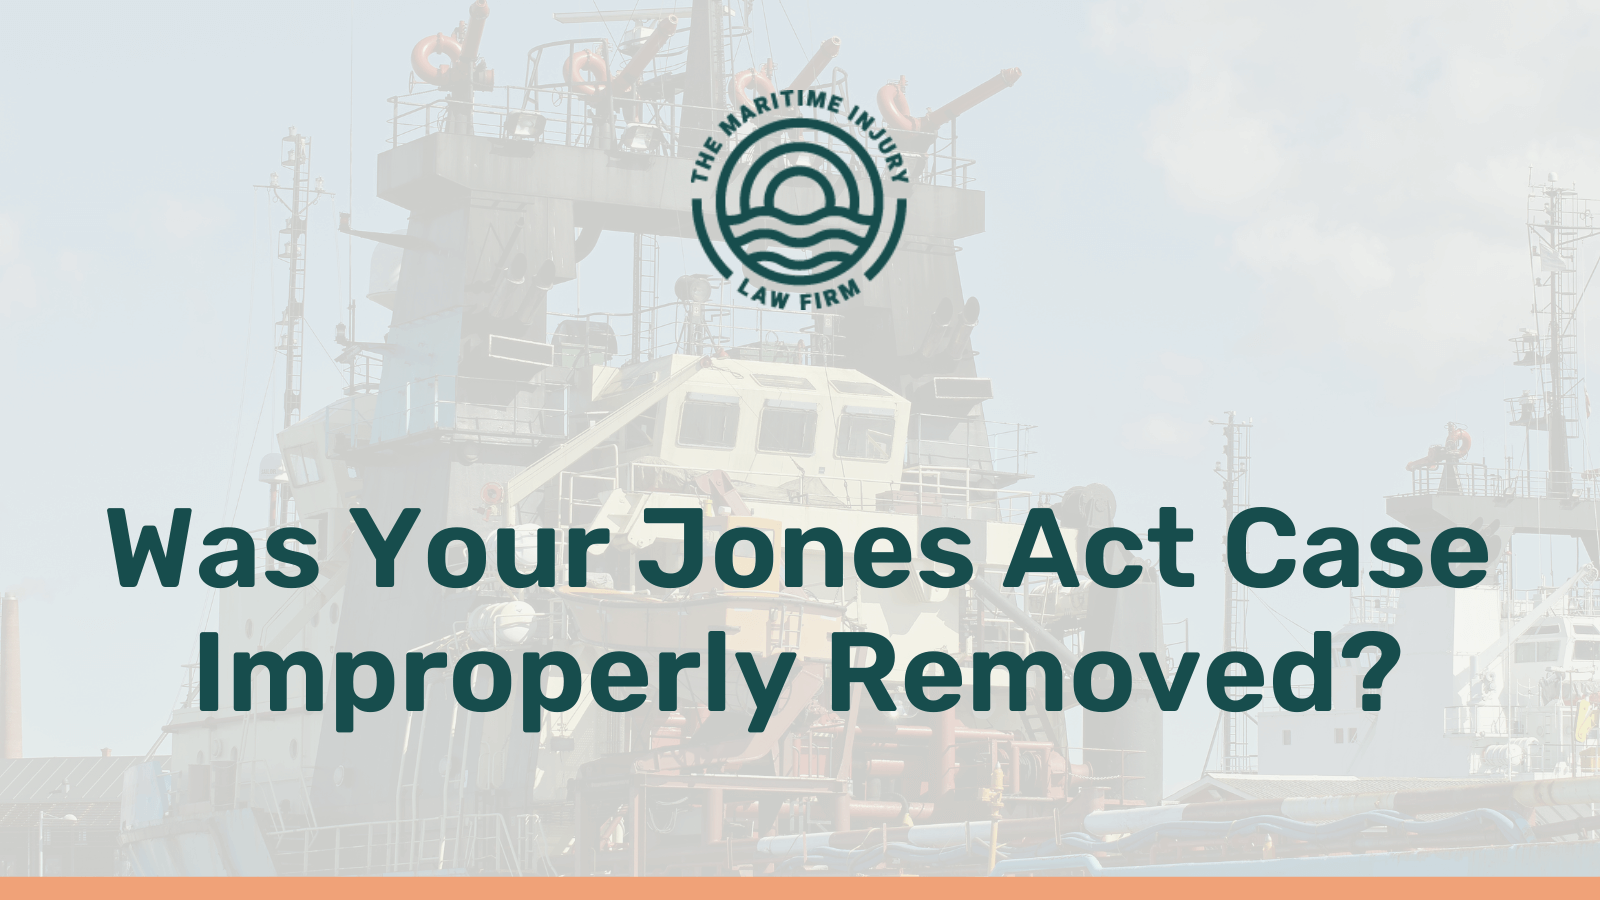 Was Your Jones Act Case Improperly Removed - maritime injury law firm - George Vourvoulias